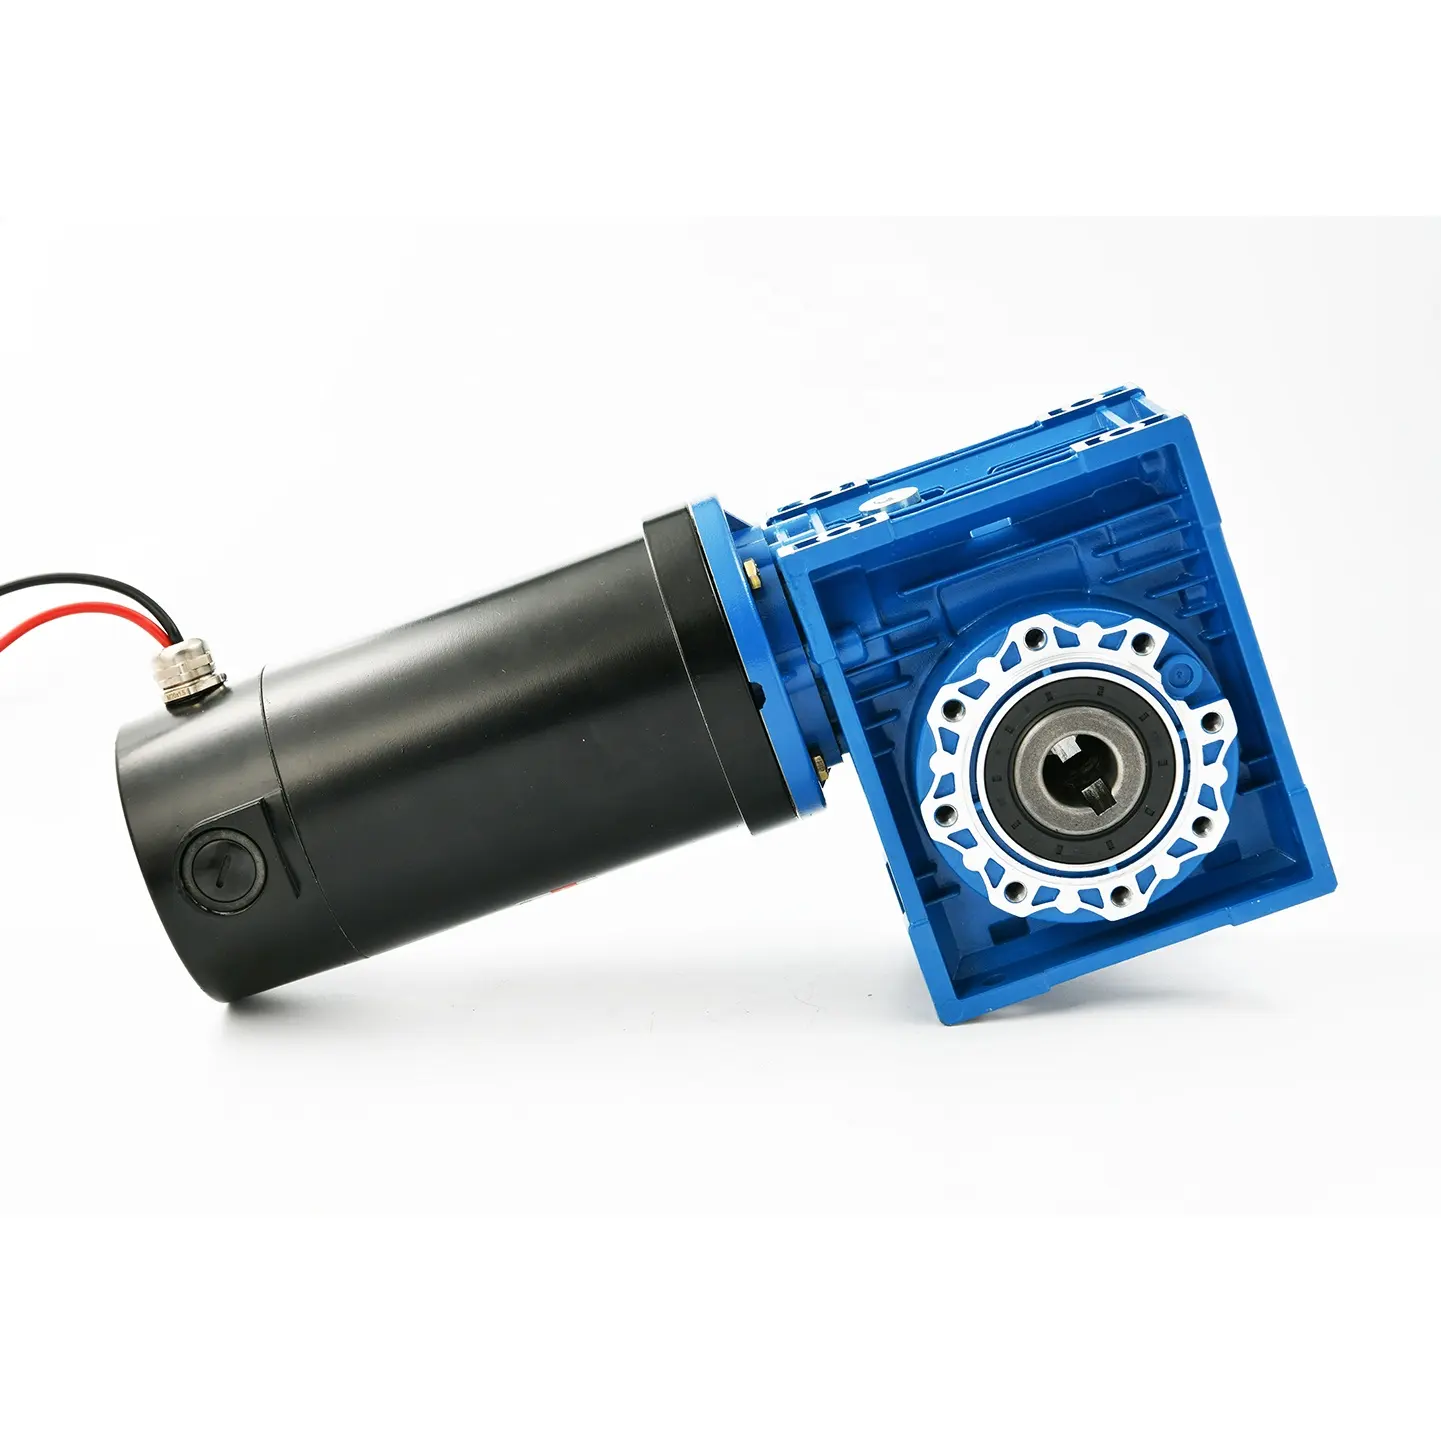 High Torque 250w 500w 1000w 24v Worm Geared Right Angle Gearbox DC 12v Gear Motor